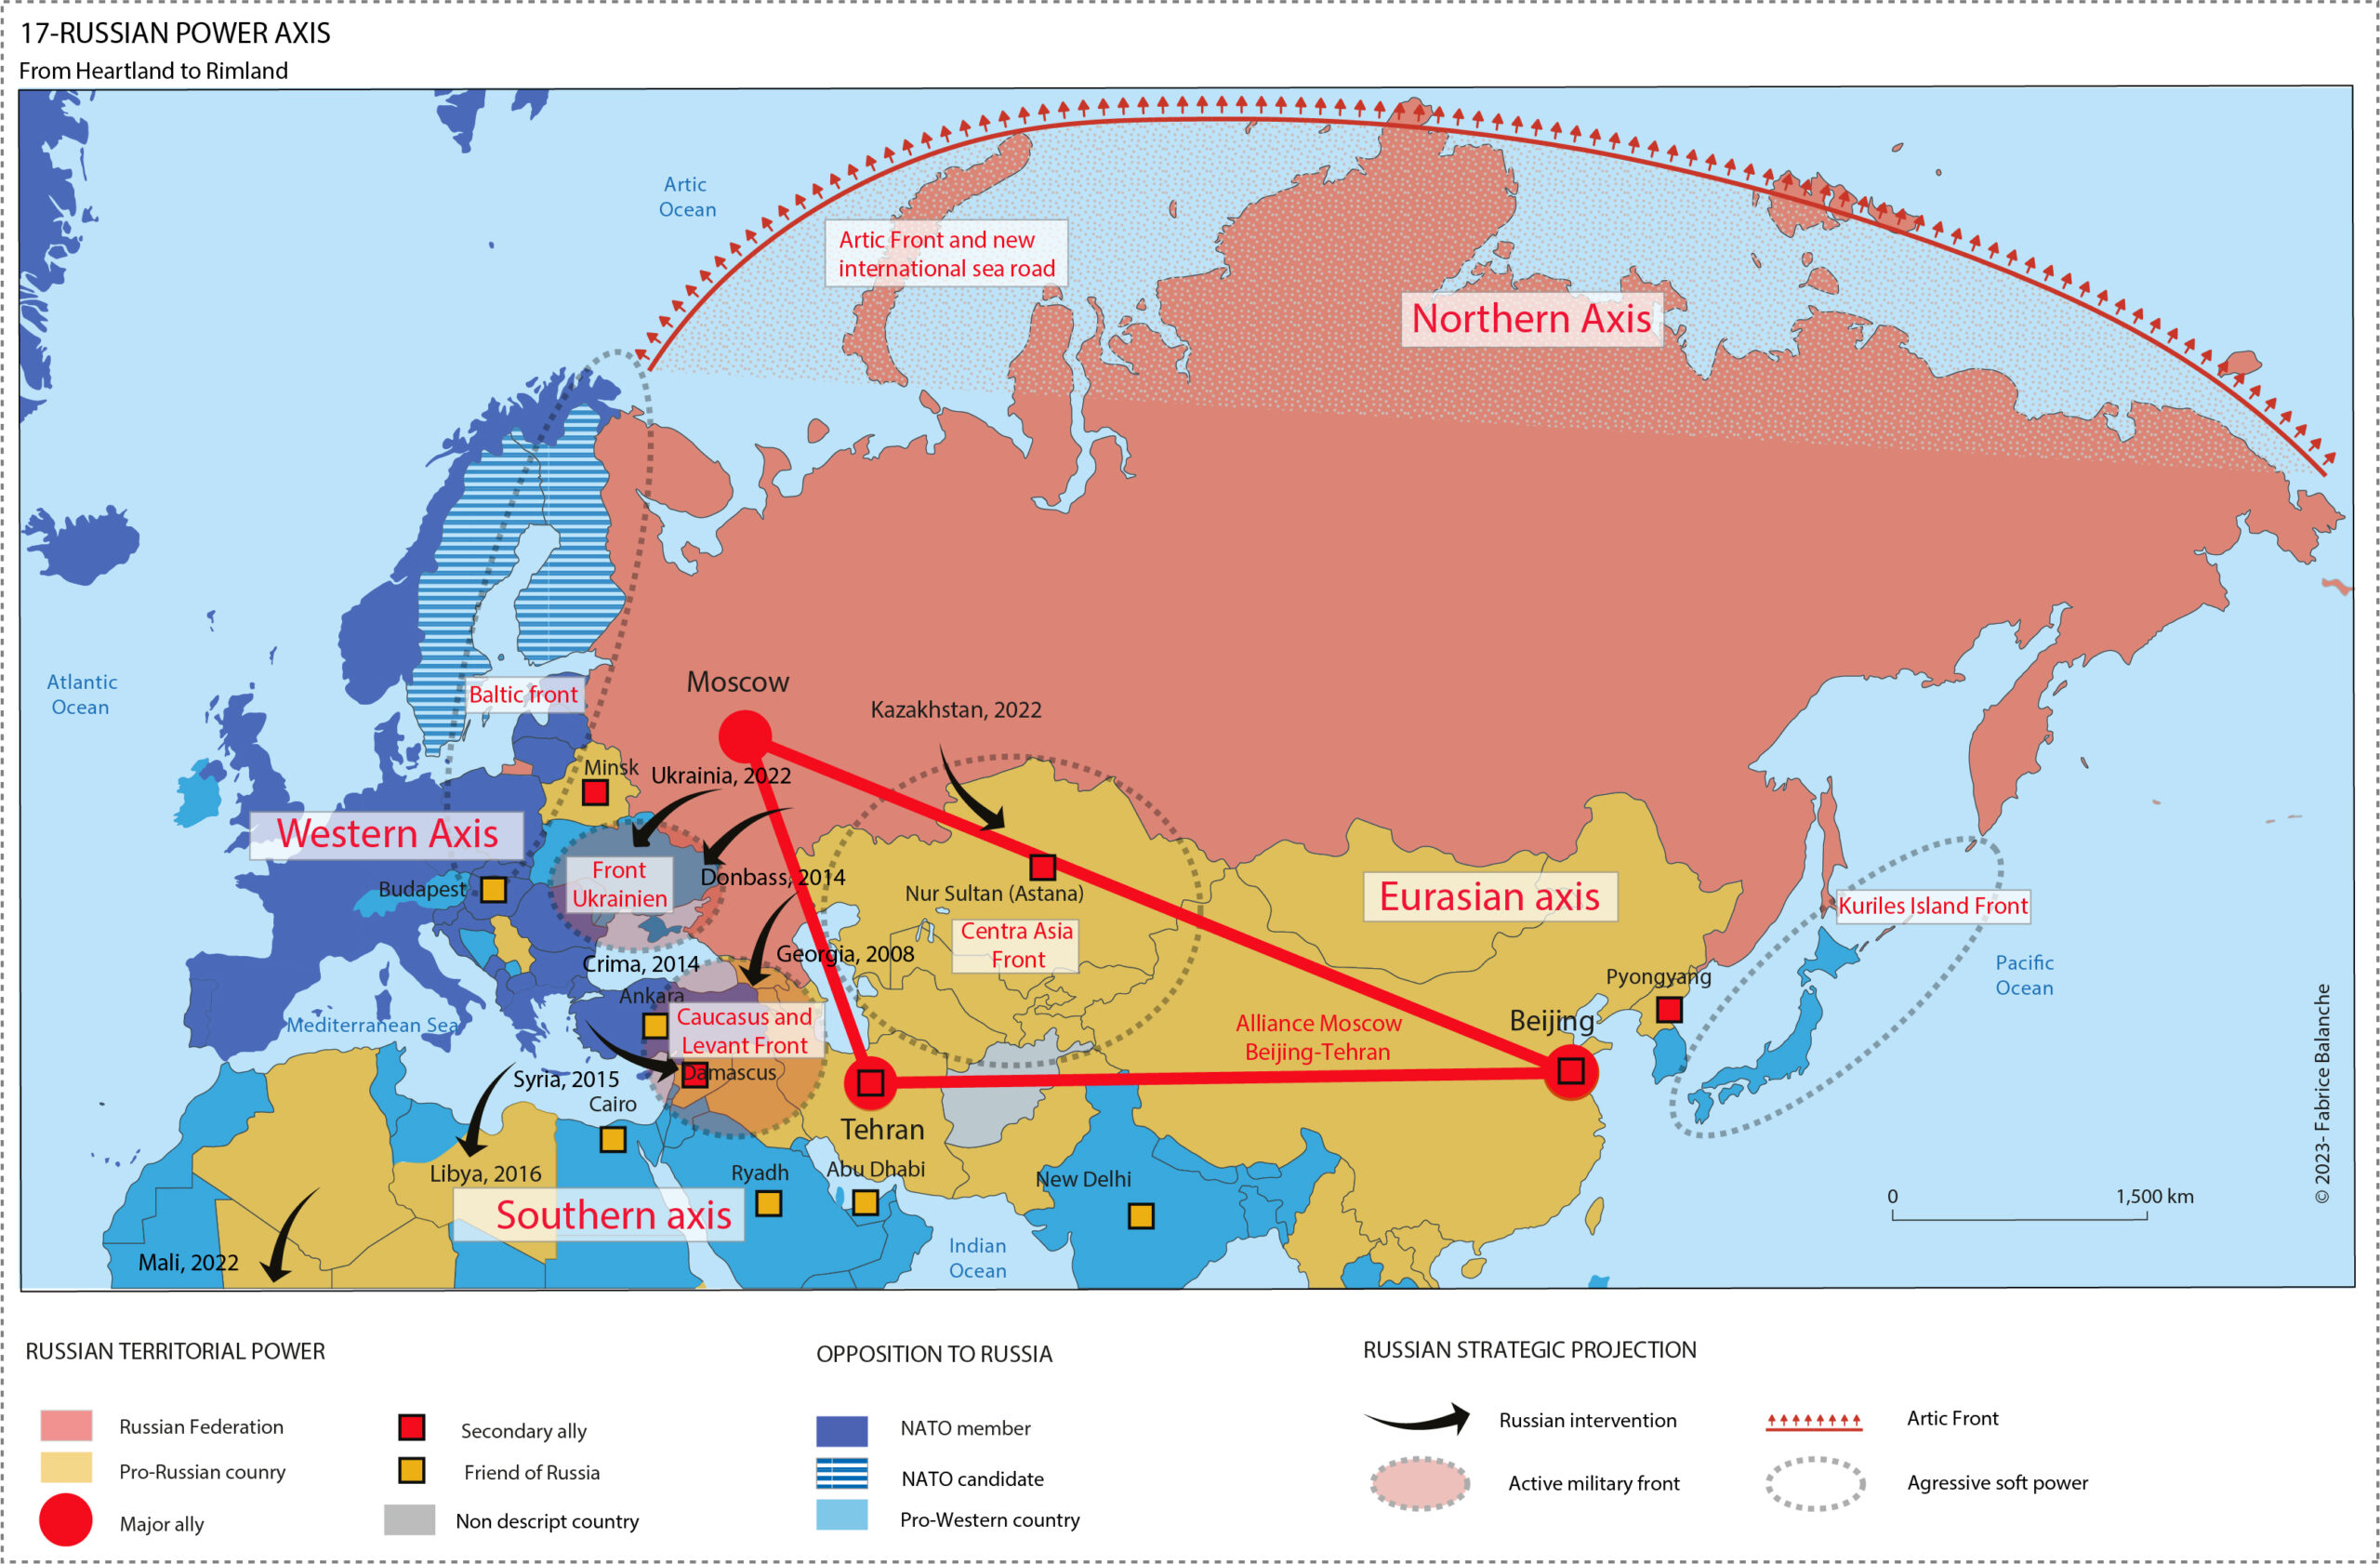 Russian axis of power - Fabrice Balanche